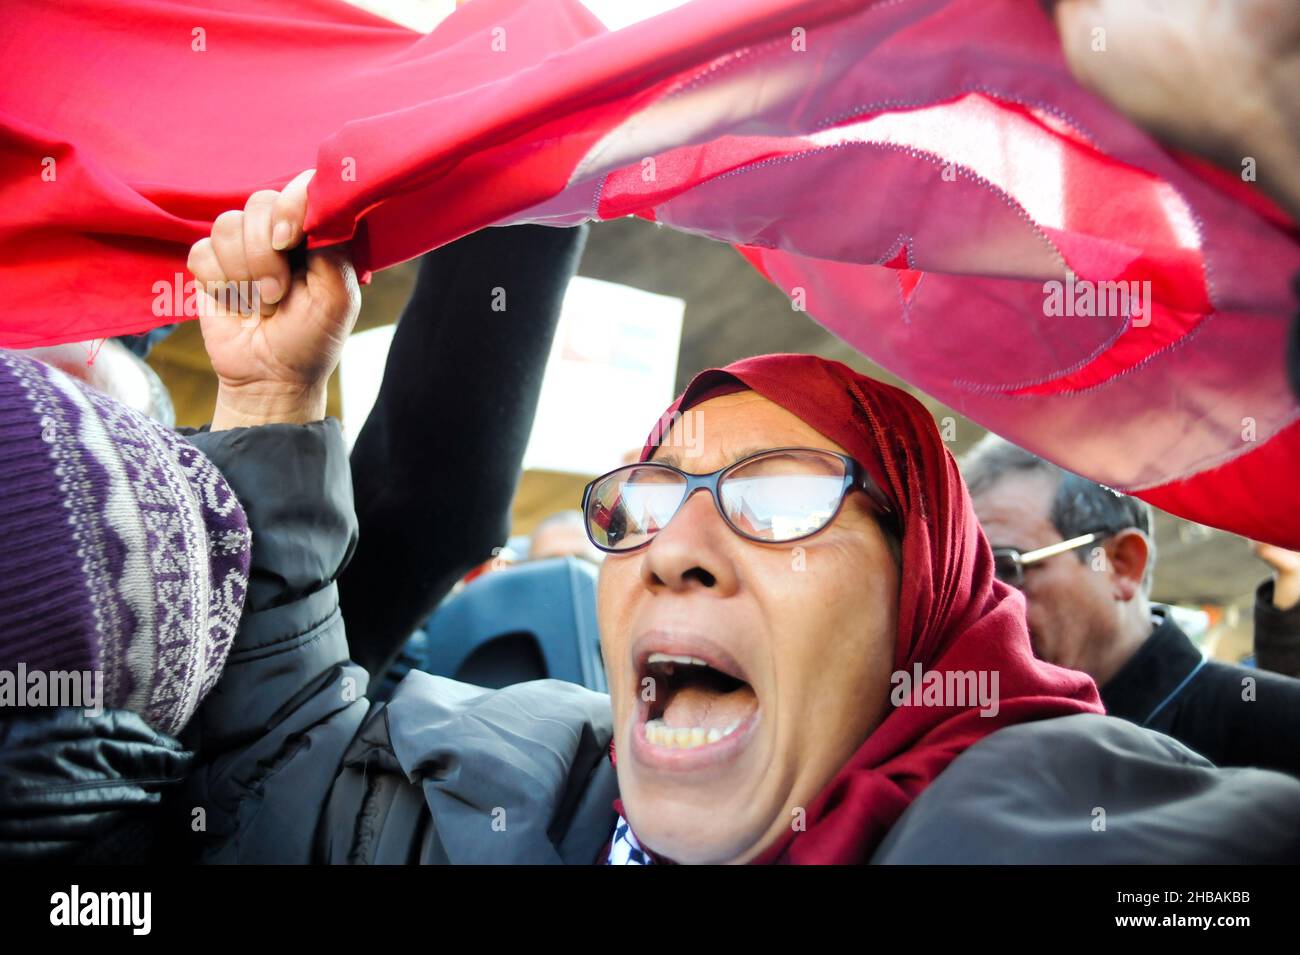 Tunis, Tunisia. 17th Dec, 2021. Tunis, Tunisia. 17 December 2021. Tunisians protesters rally against President Kais Saied in the capital Tunis, on the 10th anniversary of the start of the 2011 revolution. Opponents of Tunisian President Kais Saied rejected his decision on Monday to keep parliament suspended for another year. Credit: ZUMA Press, Inc./Alamy Live News Stock Photo